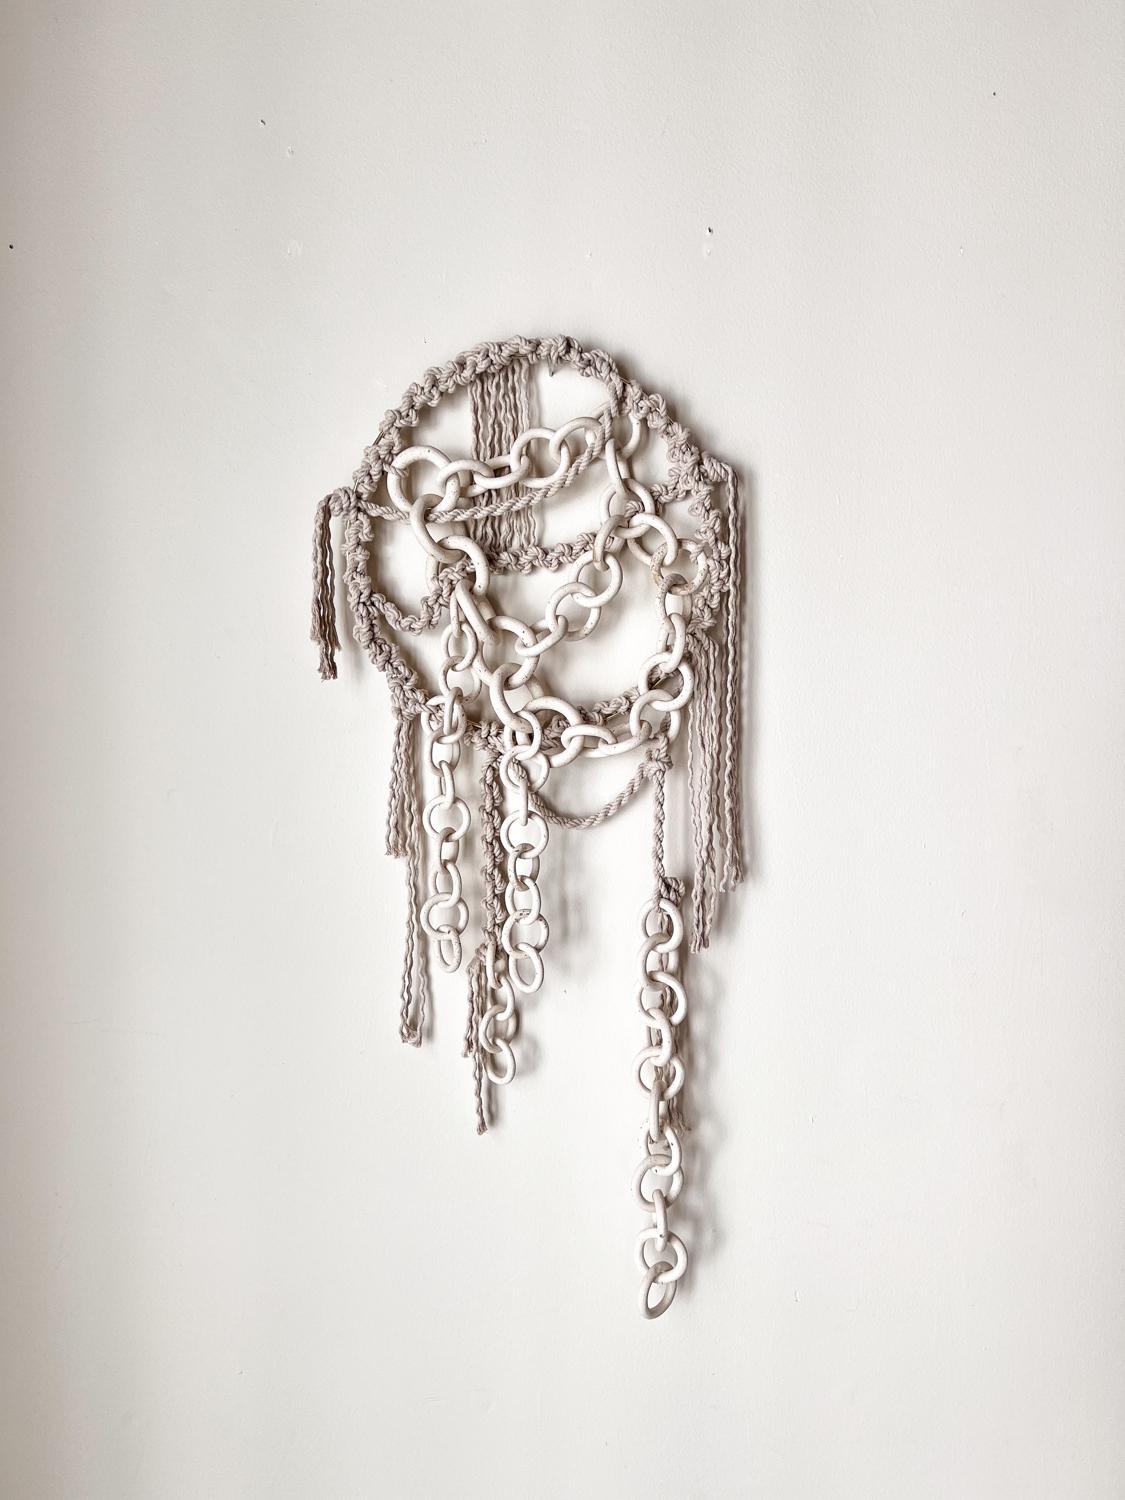 Stoneware Ceramic Link Chain Wall Sculpture For Sale